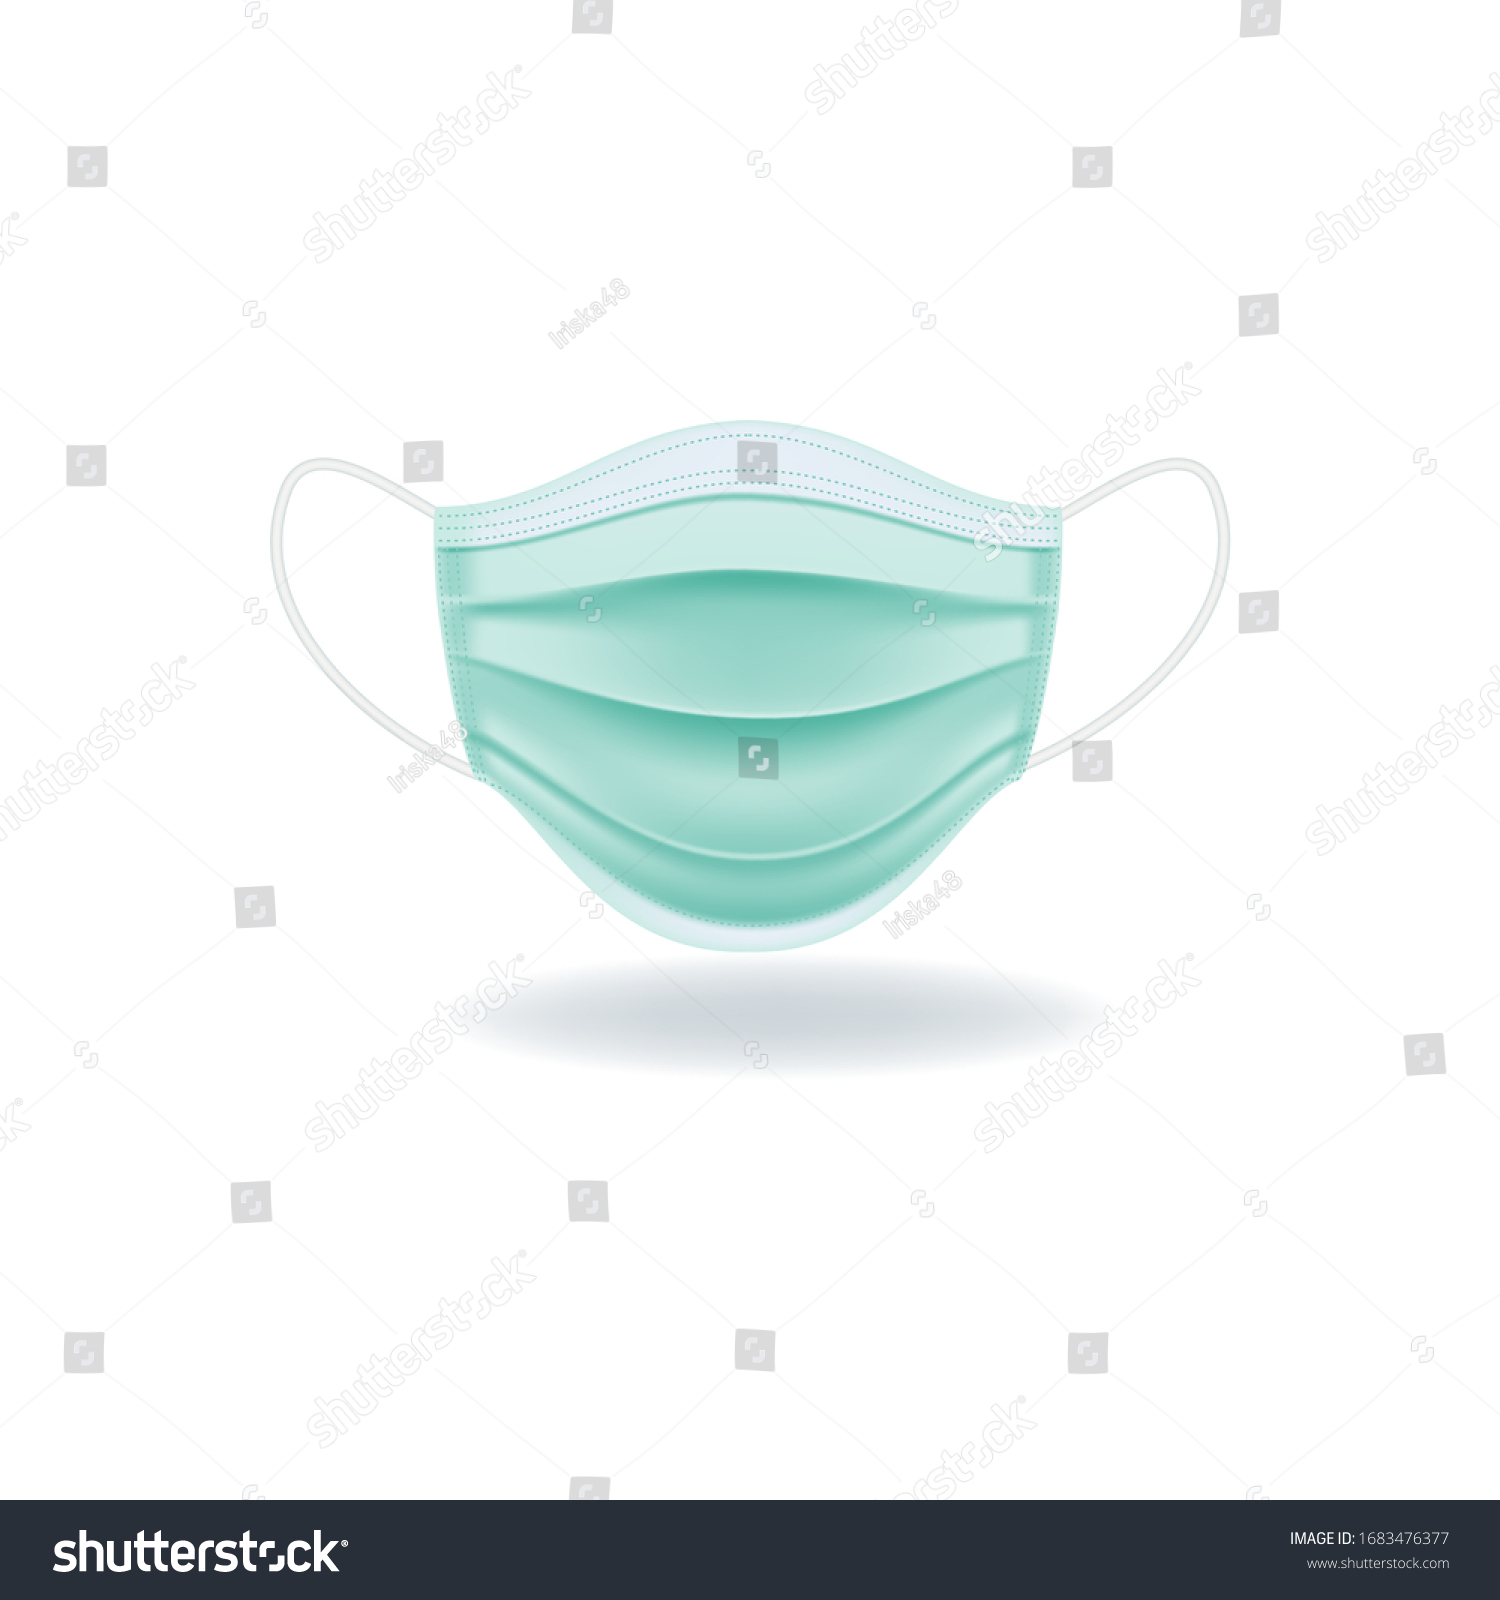 Protective medical face mask isolated on white background. Realistic vector illustration.  #1683476377